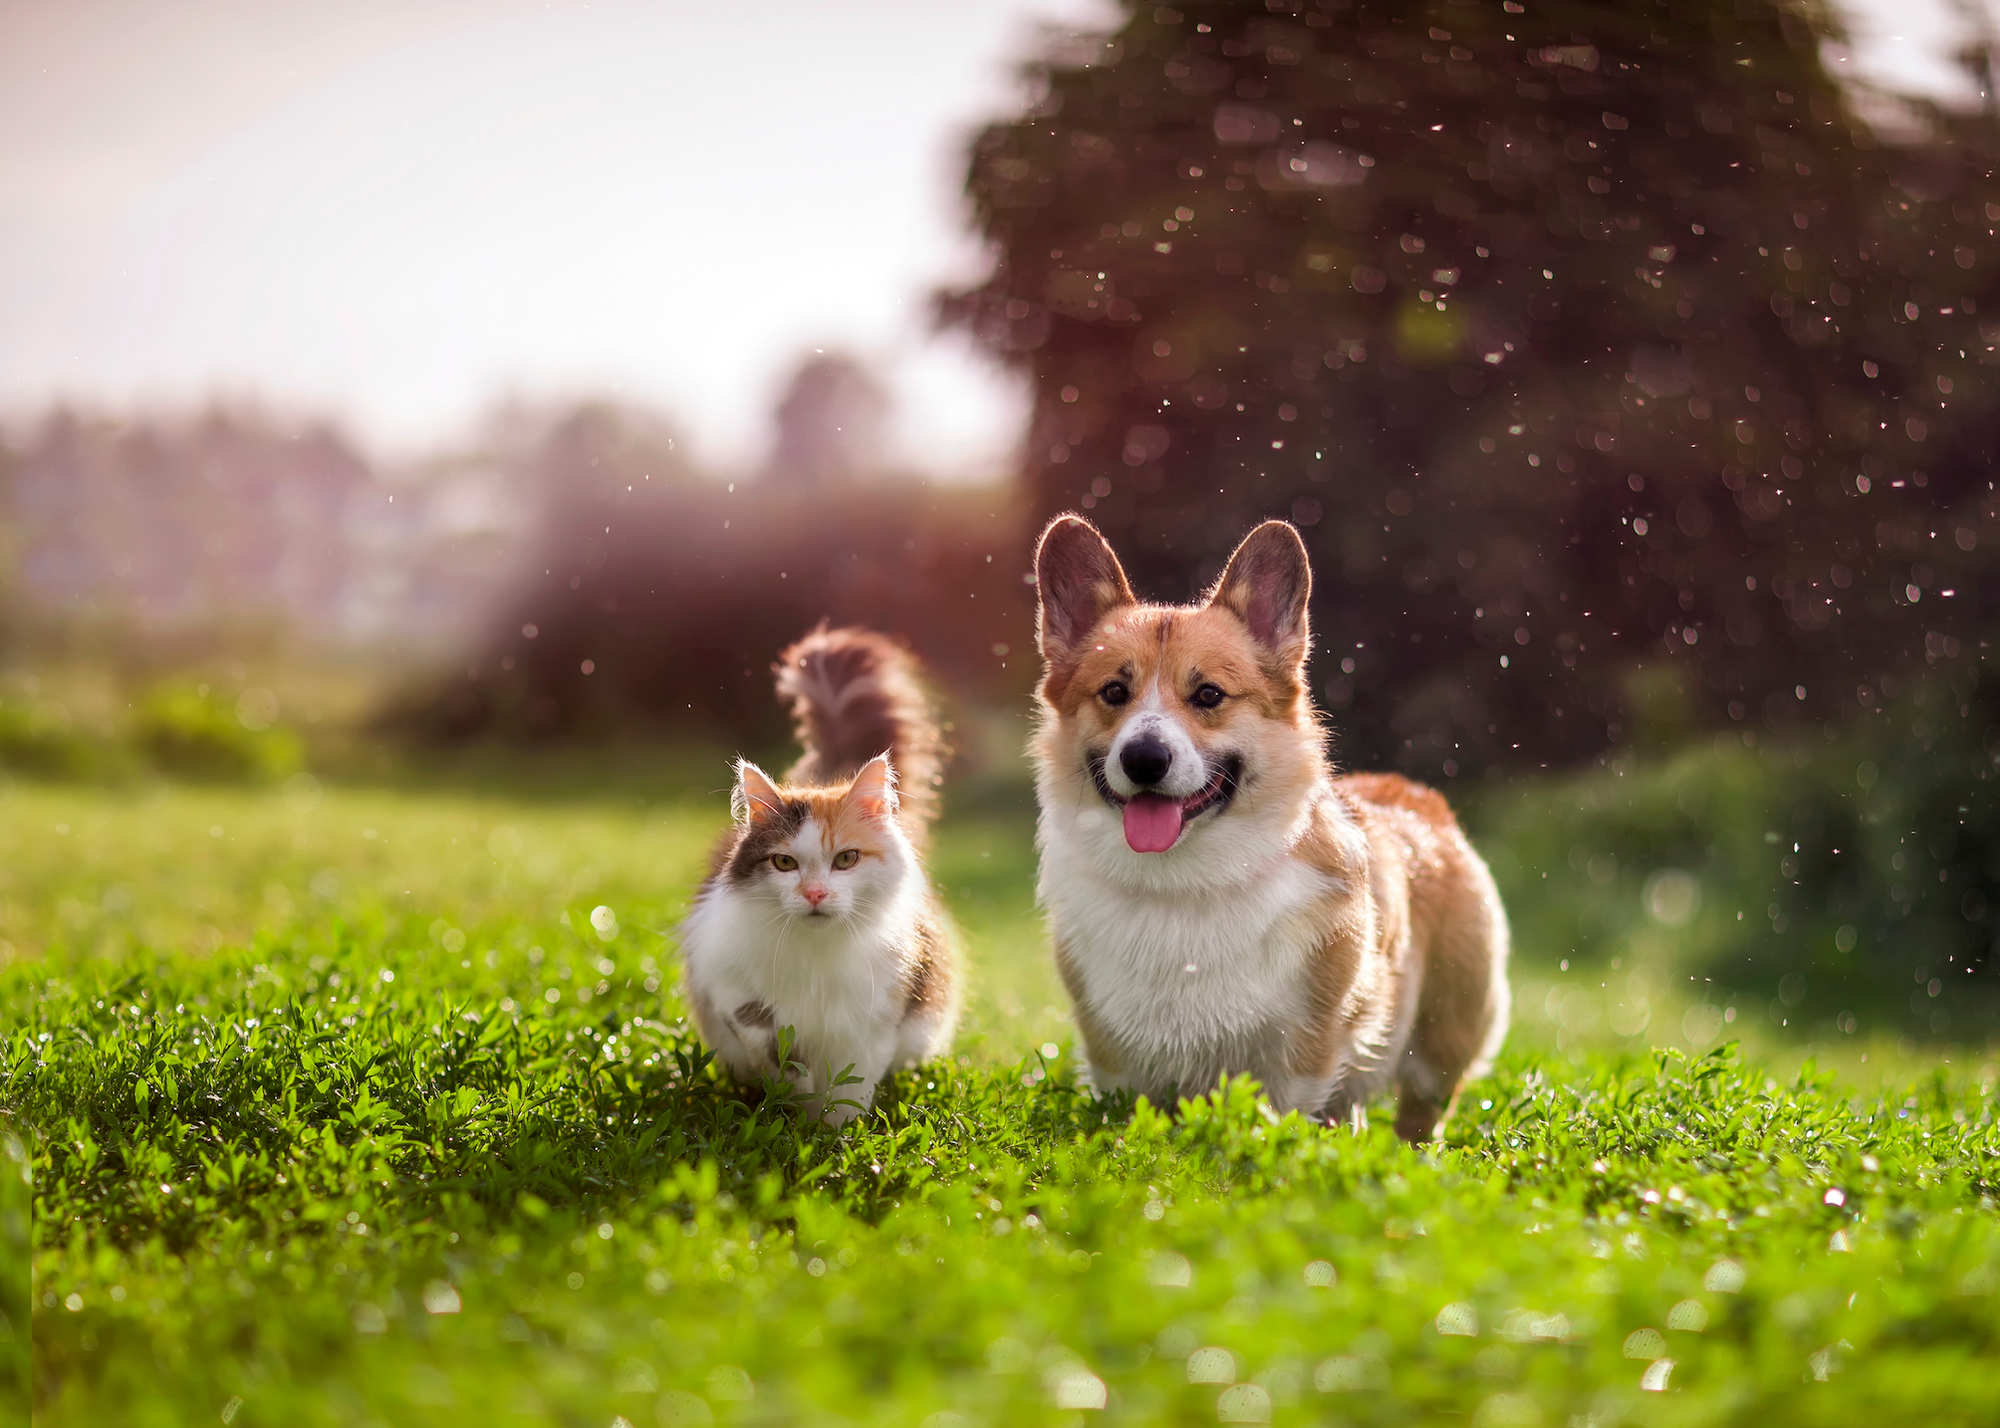 Dog and cat playing in grass, one standing, one running.